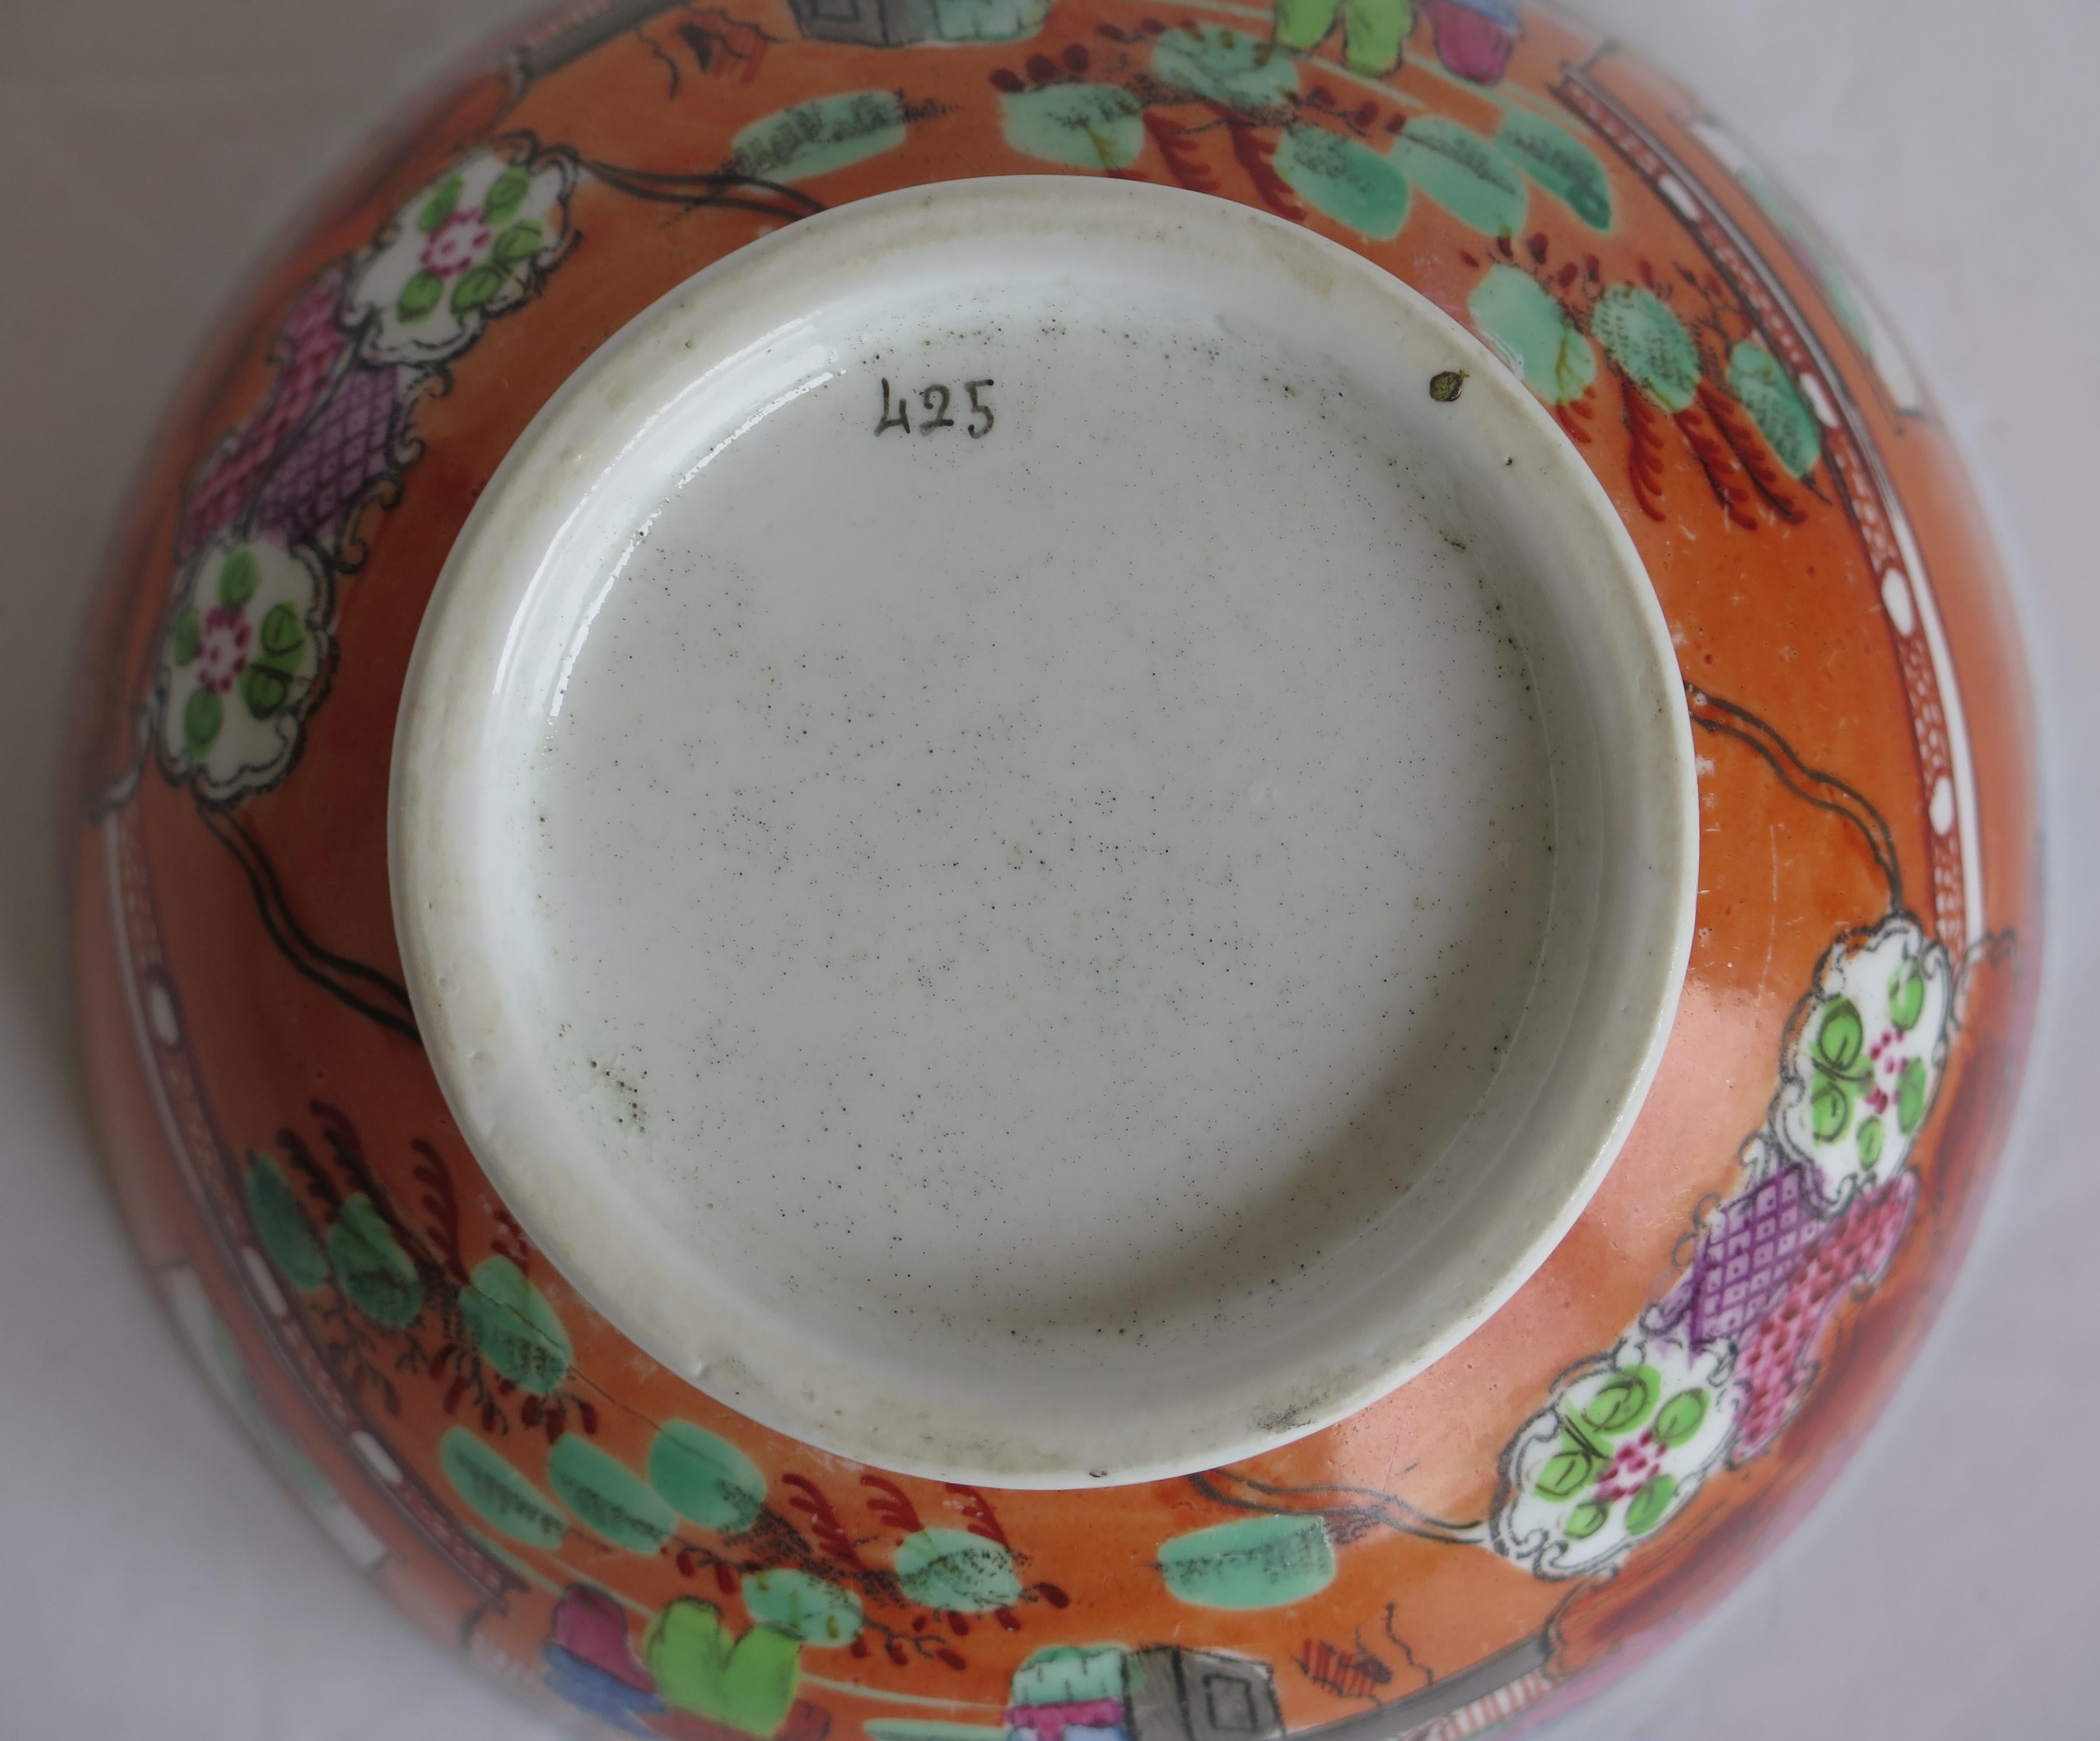 Early New Hall Porcelain Bowl with Boy in Window Pattern No. 425, circa 1800 For Sale 3